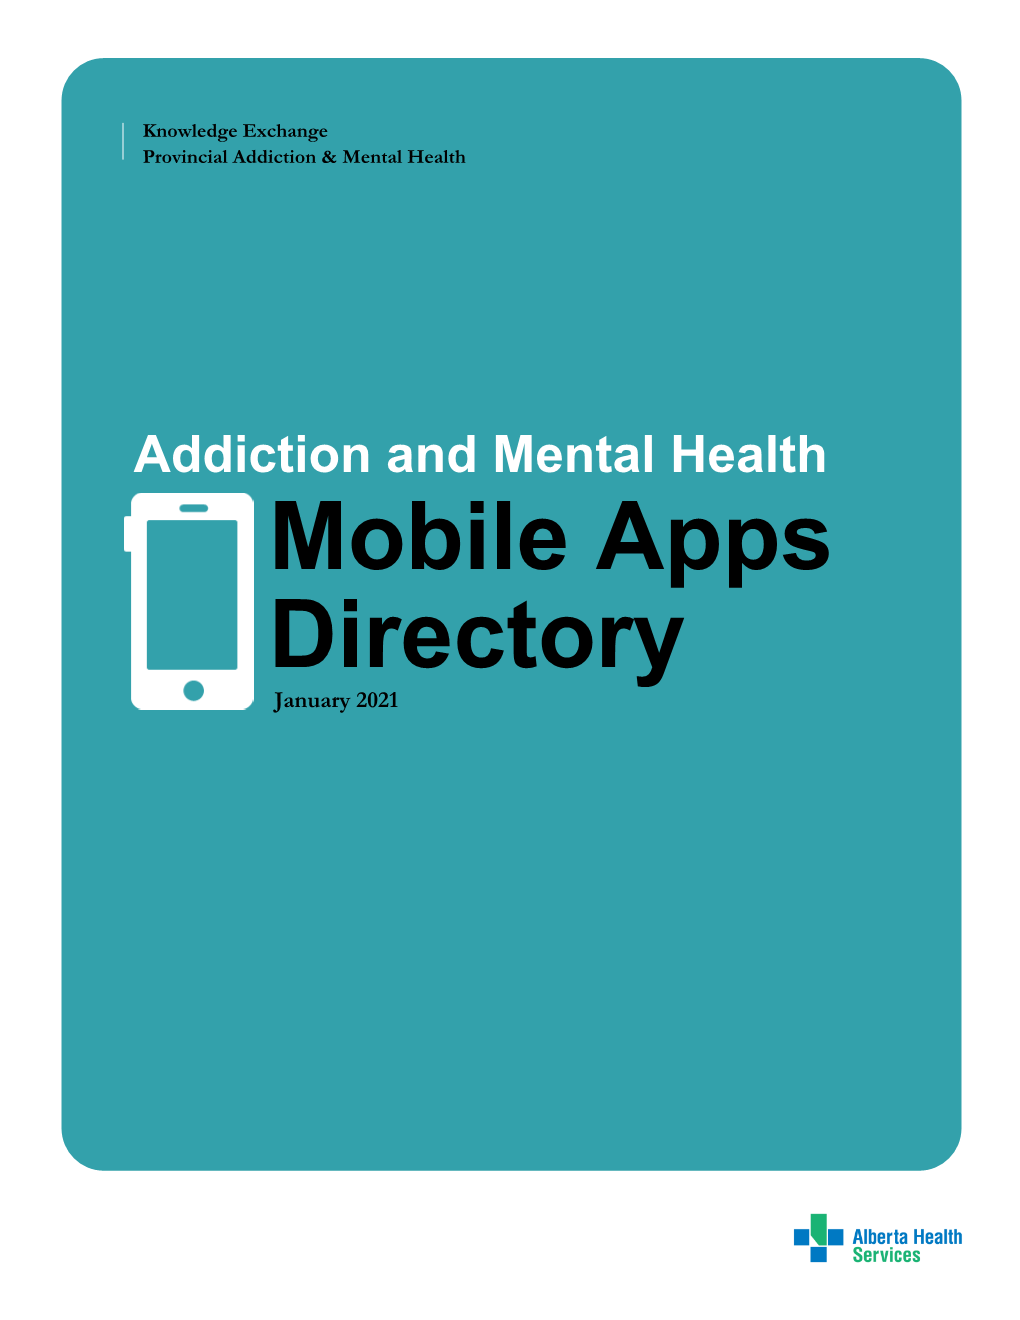 Addiction and Mental Health Mobile Apps Directory January 2021